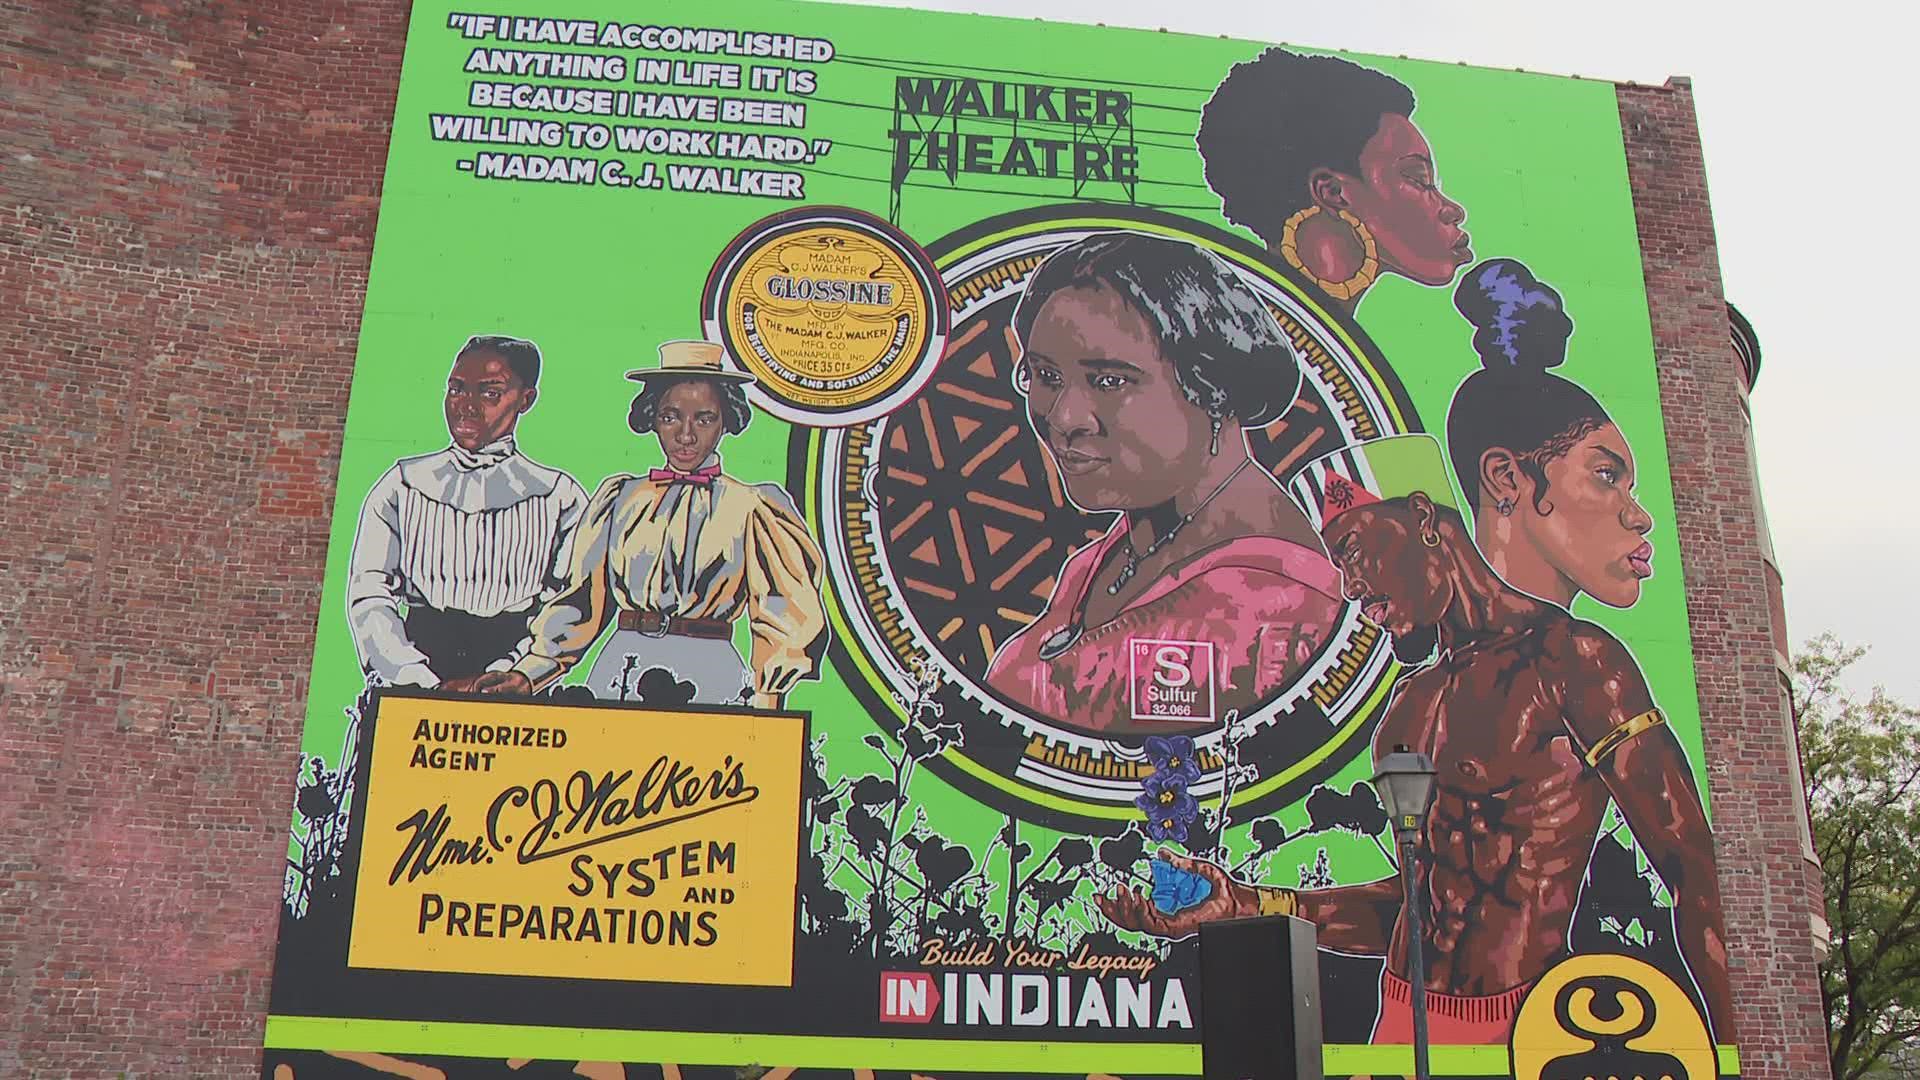 Artist Tasha Beckwith spent two months creating the mural dedicated to the Indiana icon.